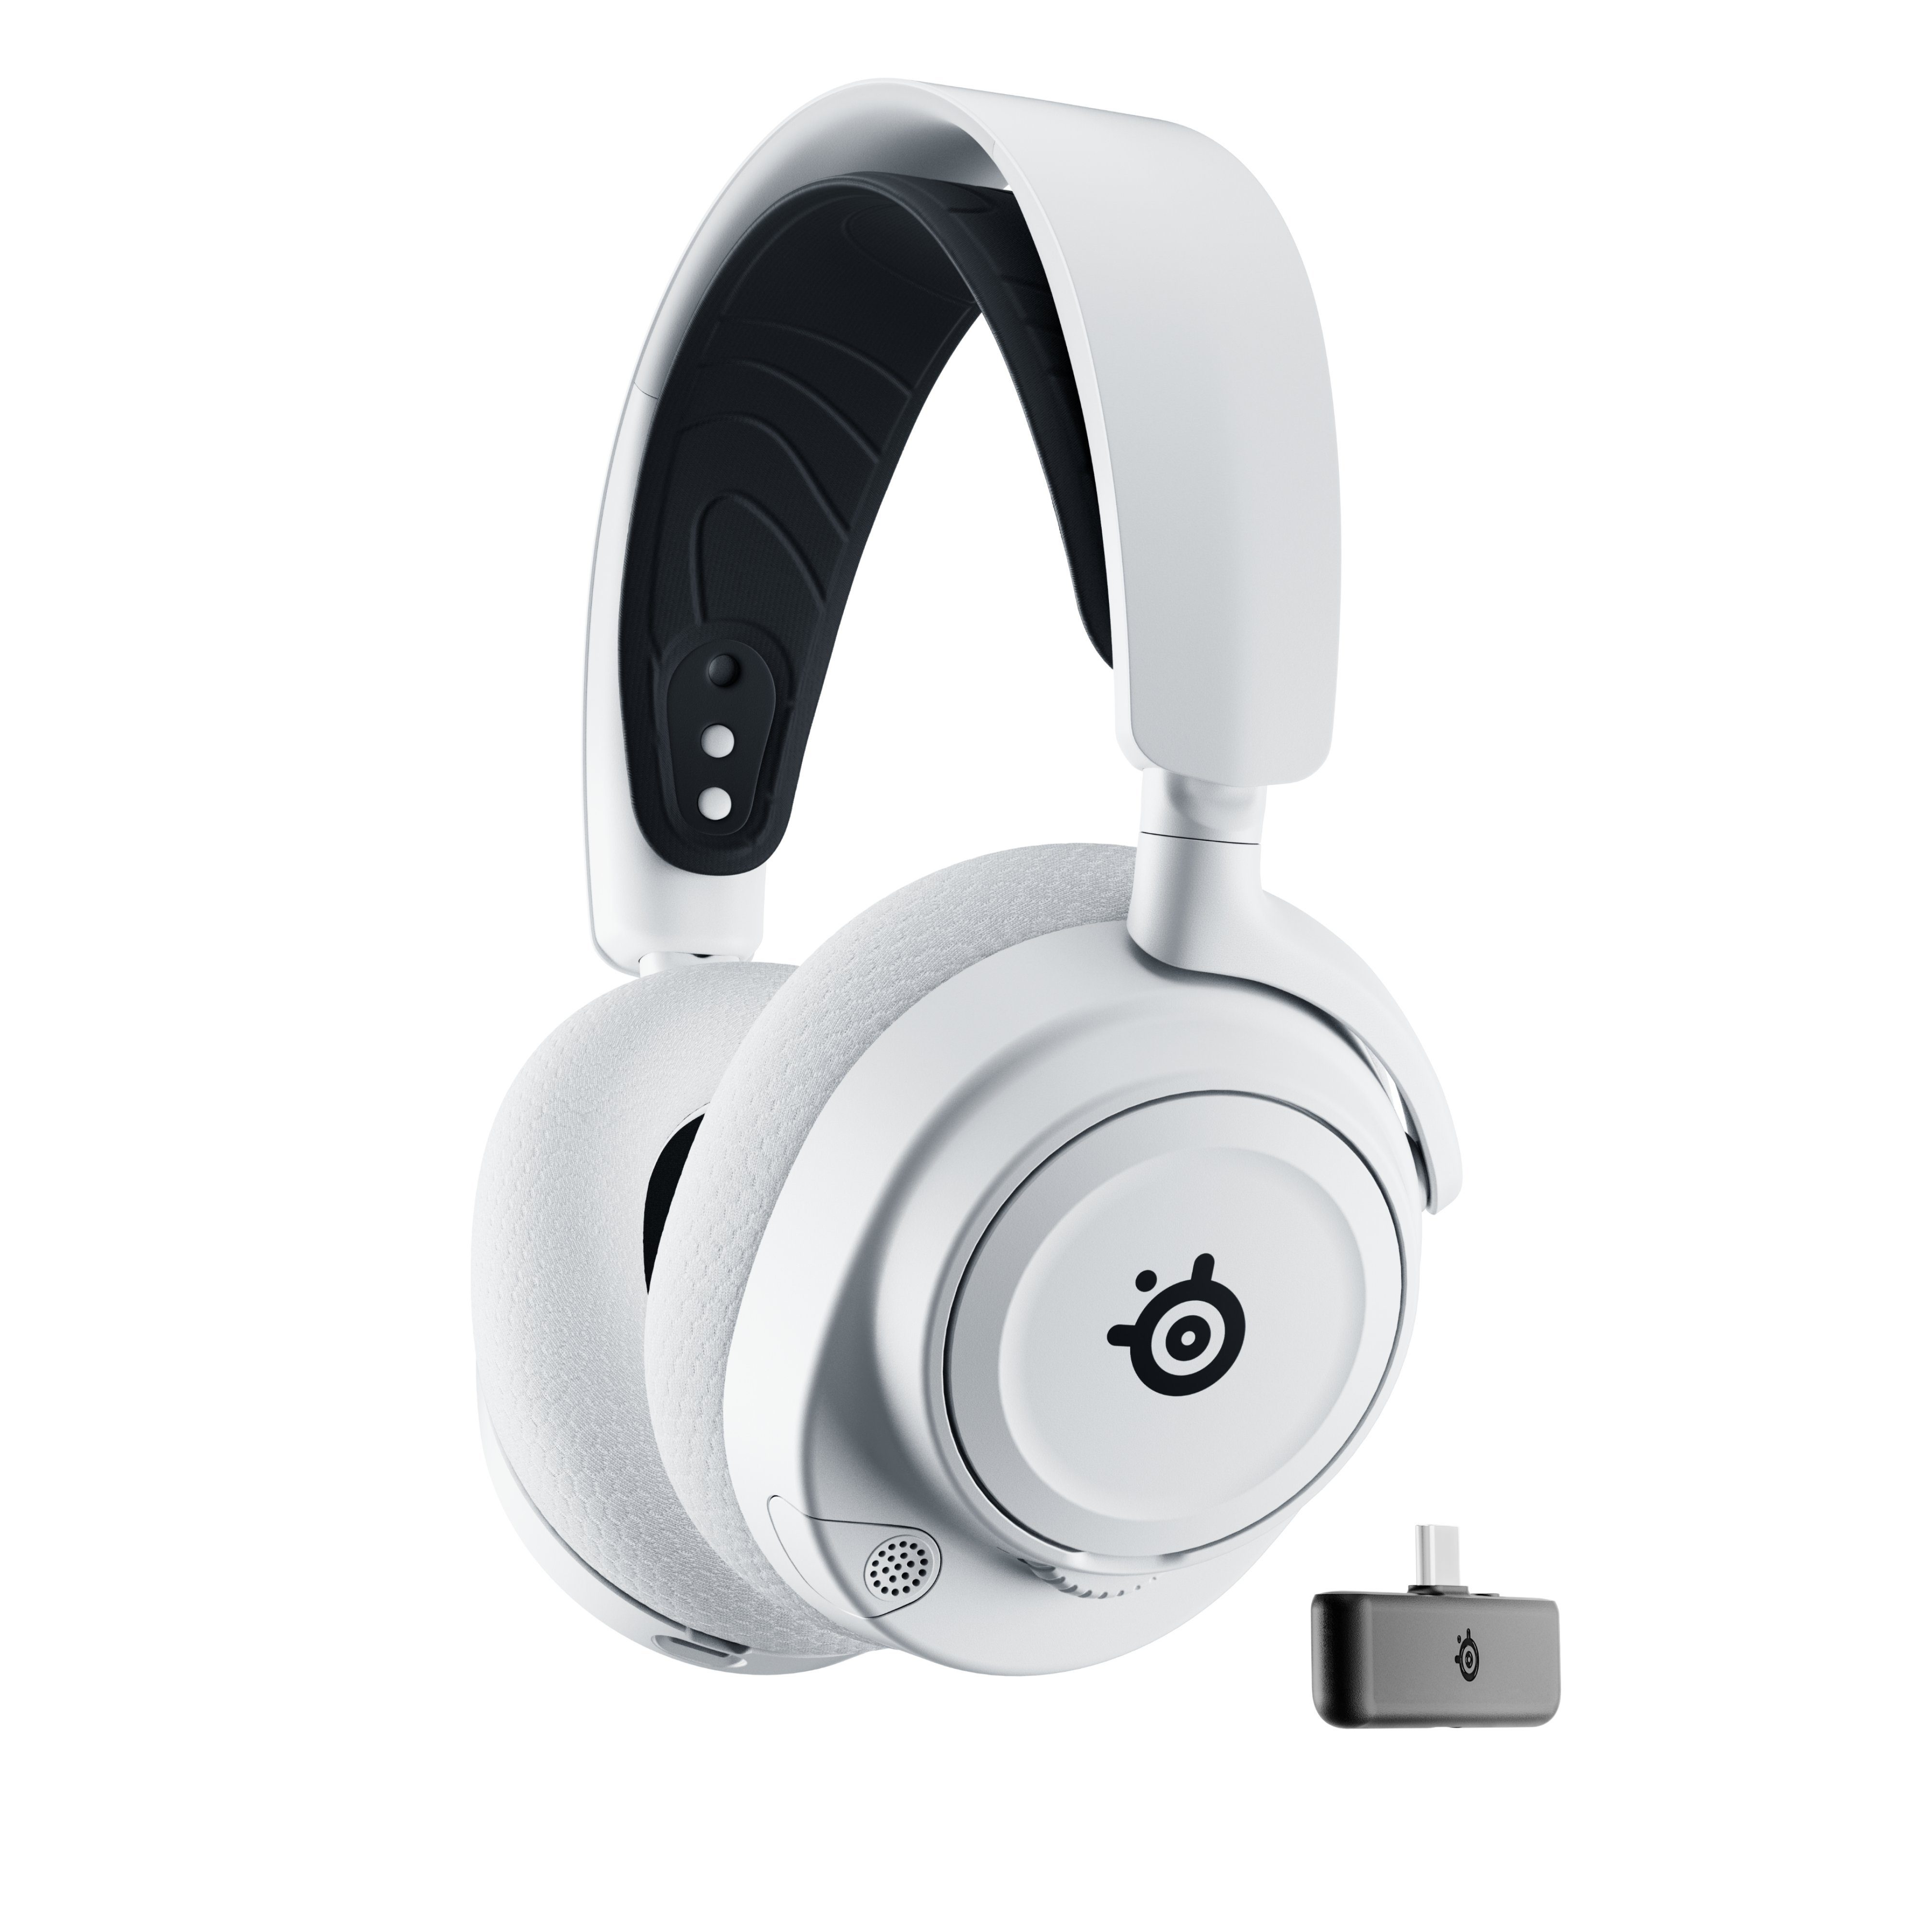 White Simultaneous SteelSeries Wireless game 7X allows Gaming-Headset Nova audio (Noise-Cancelling), and Bluetooth) and (2.4GHz Arctis mobile mixing